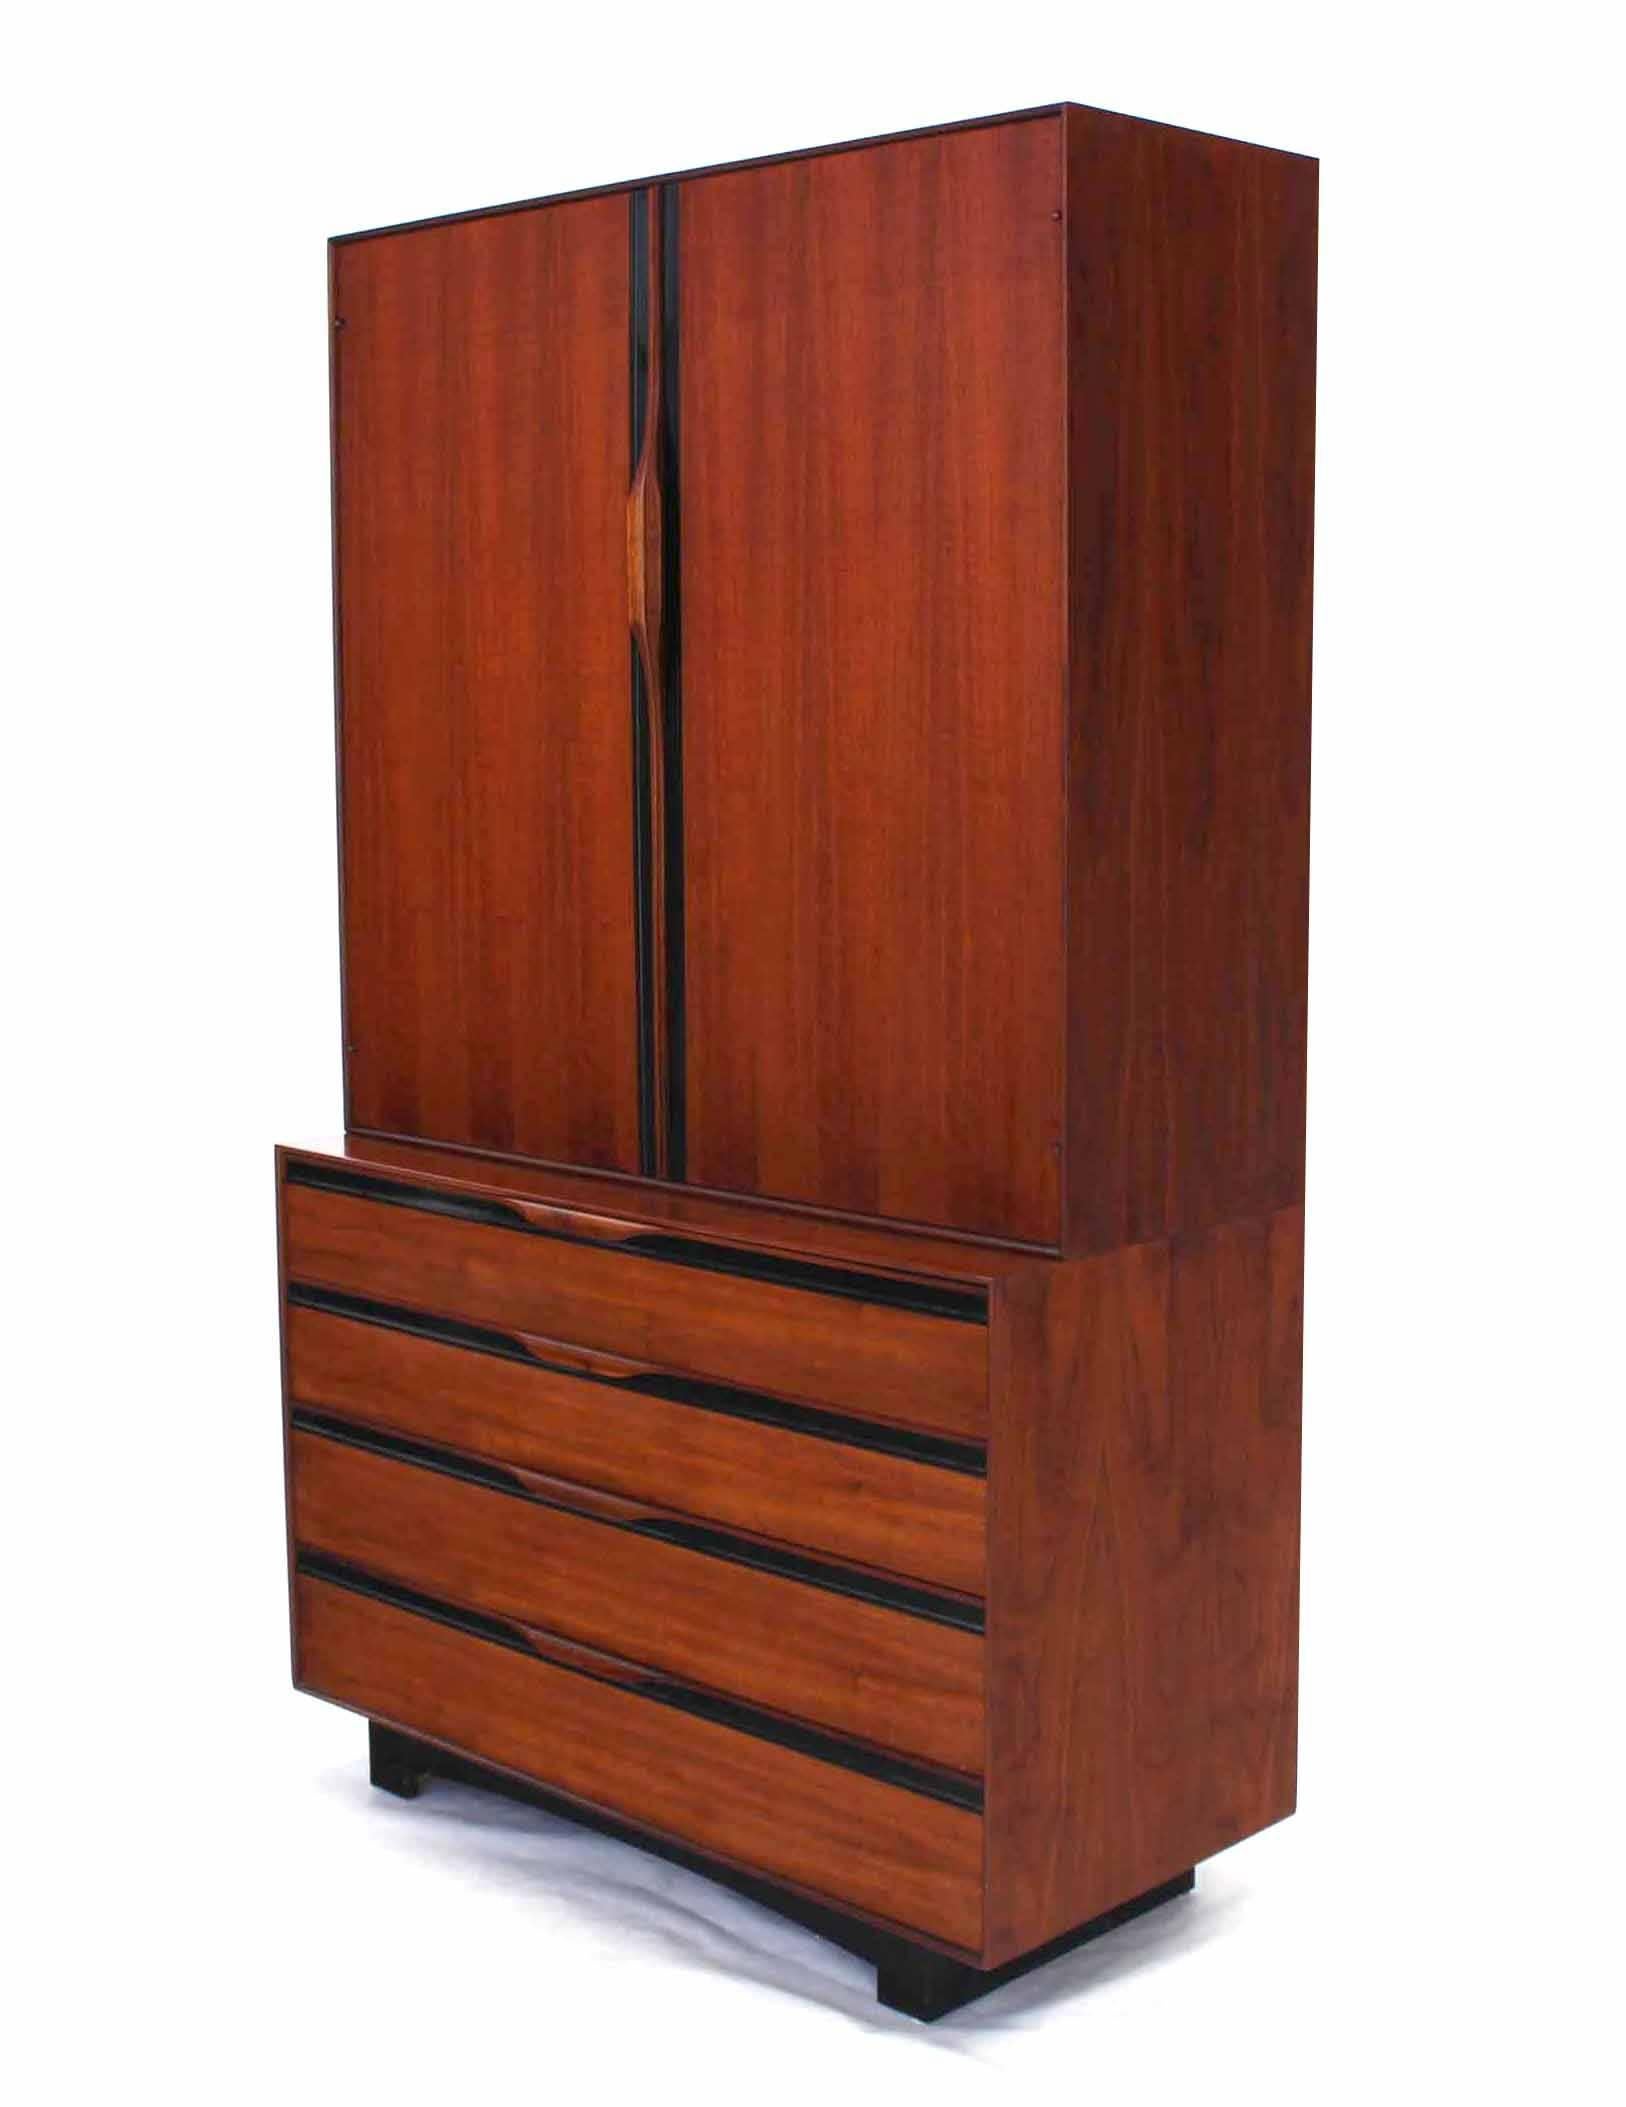 Very nice two part teak chest with hidden mirror and multi drawers compartment. Very beautiful multifunctional cabinet. 